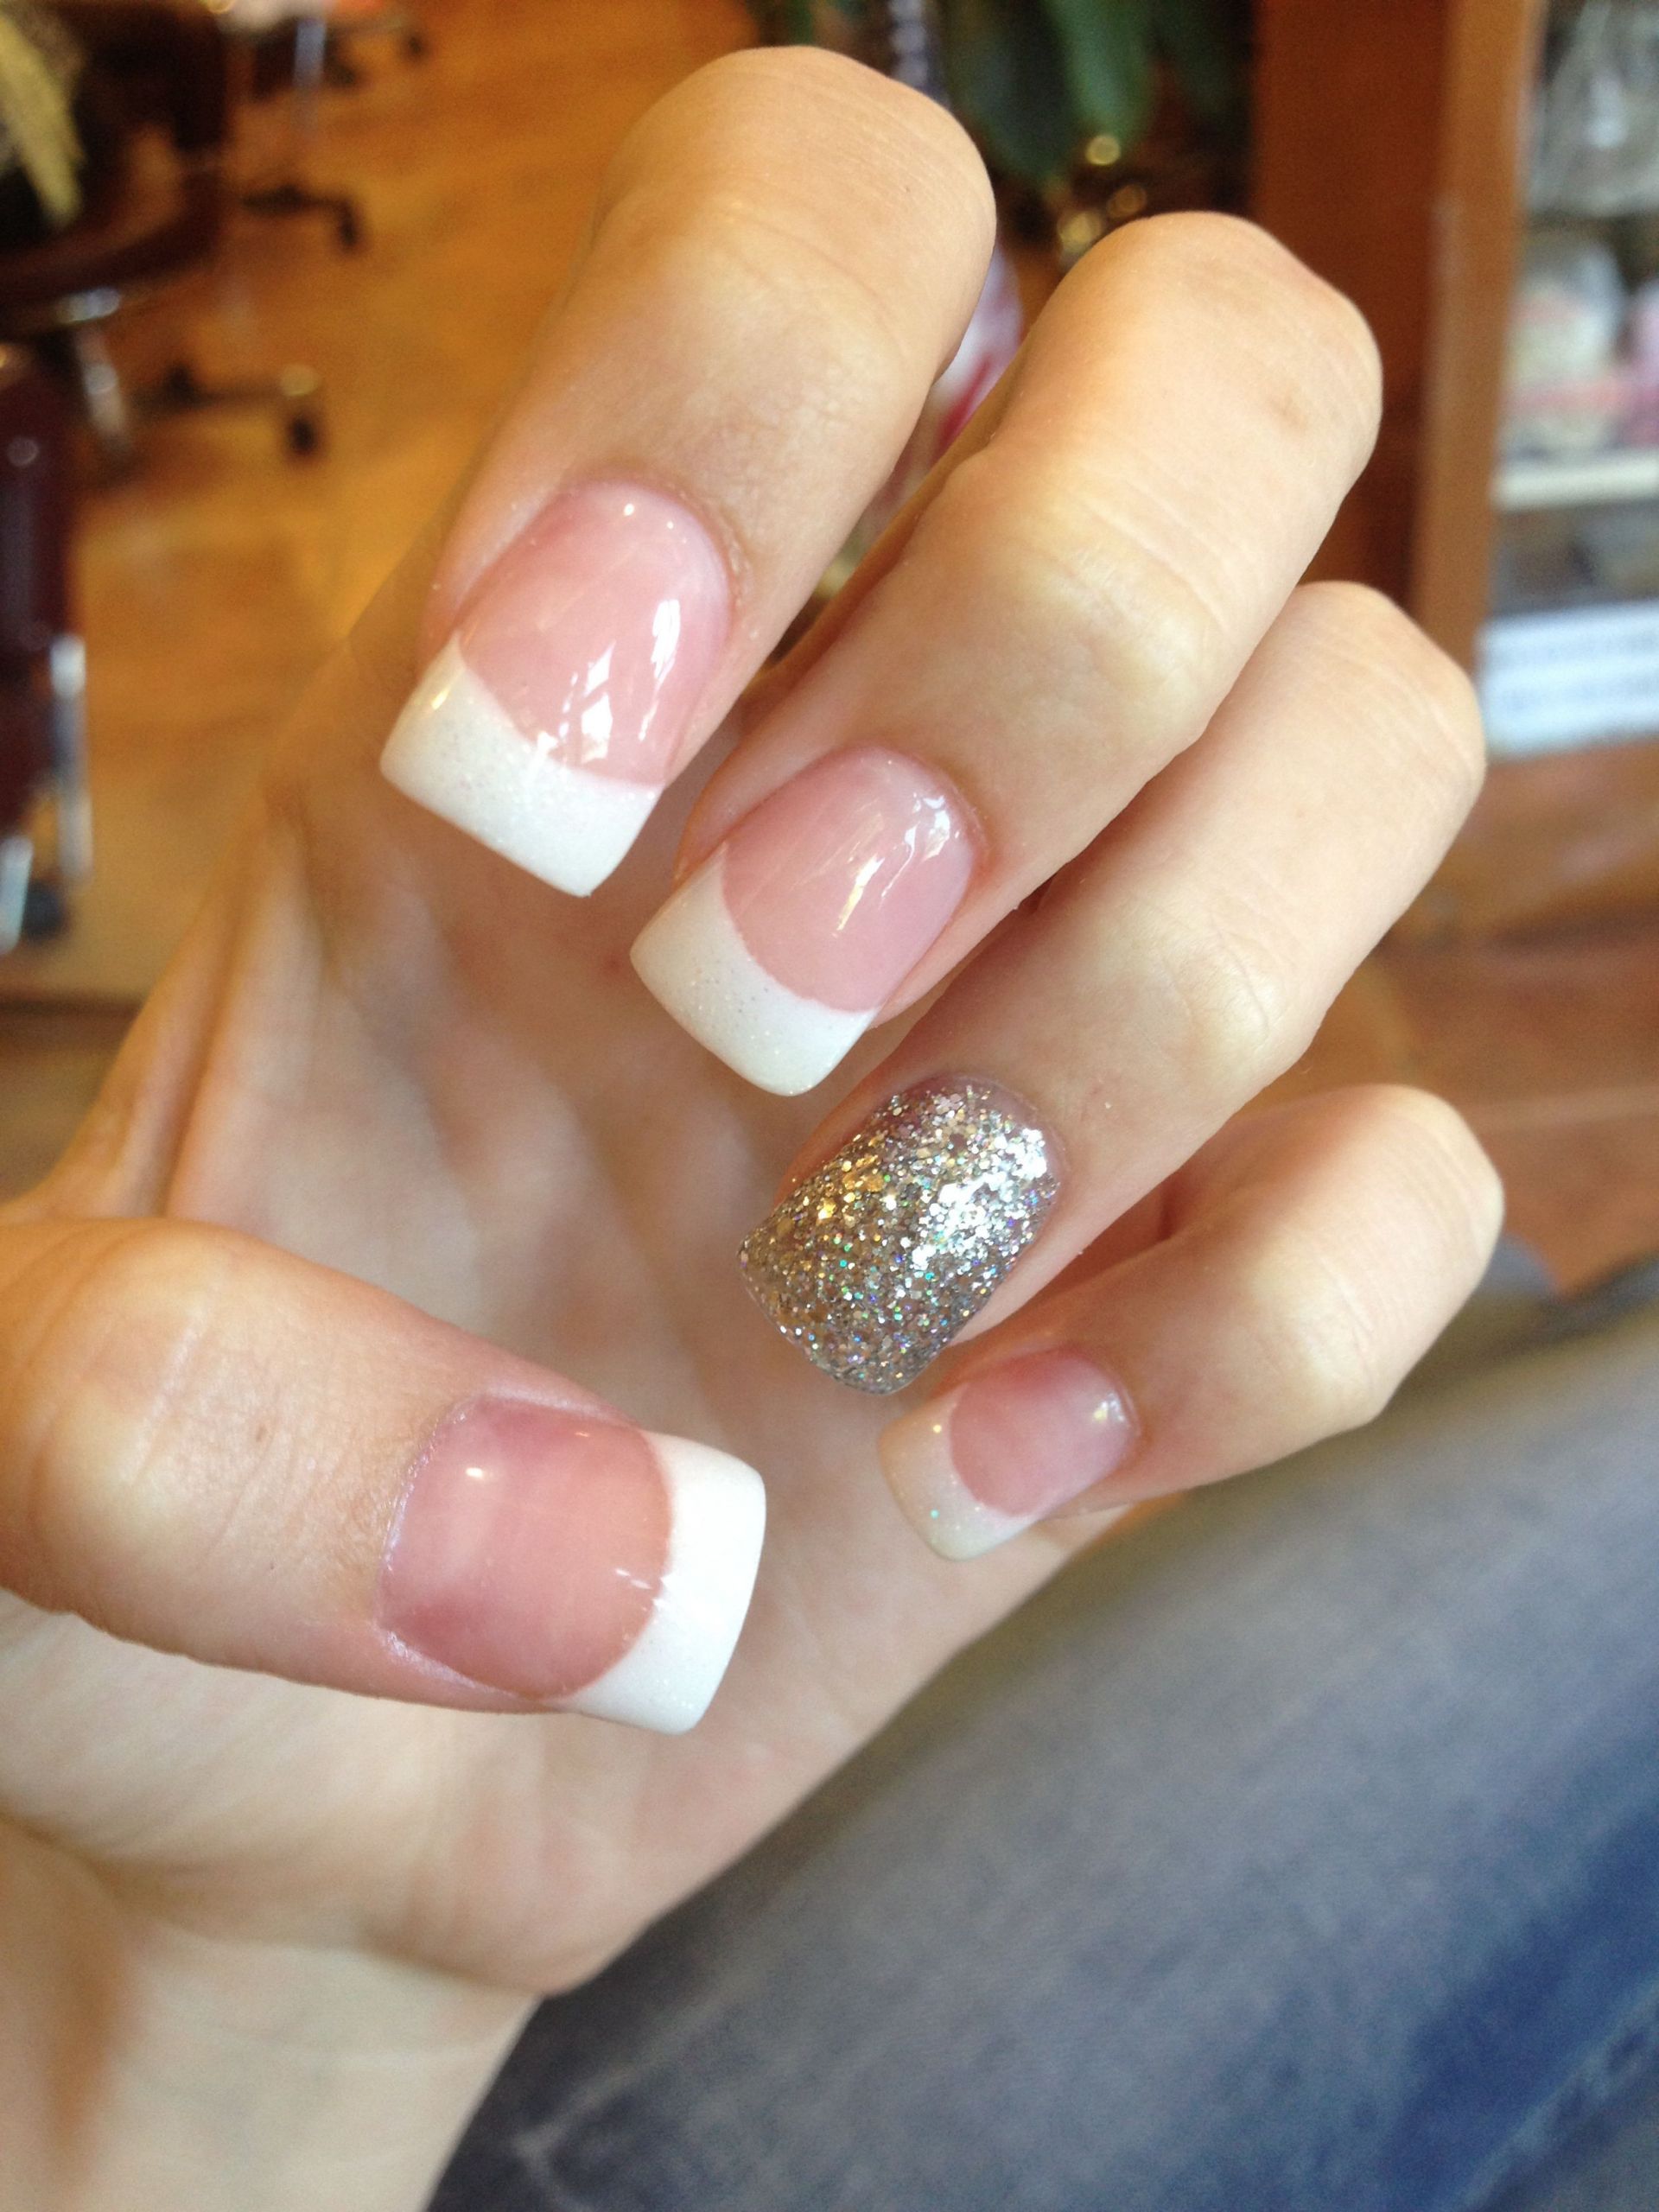 French Tip Acrylic Nails With Glitter
 Acrylic nails French tip Glitter Pink and white